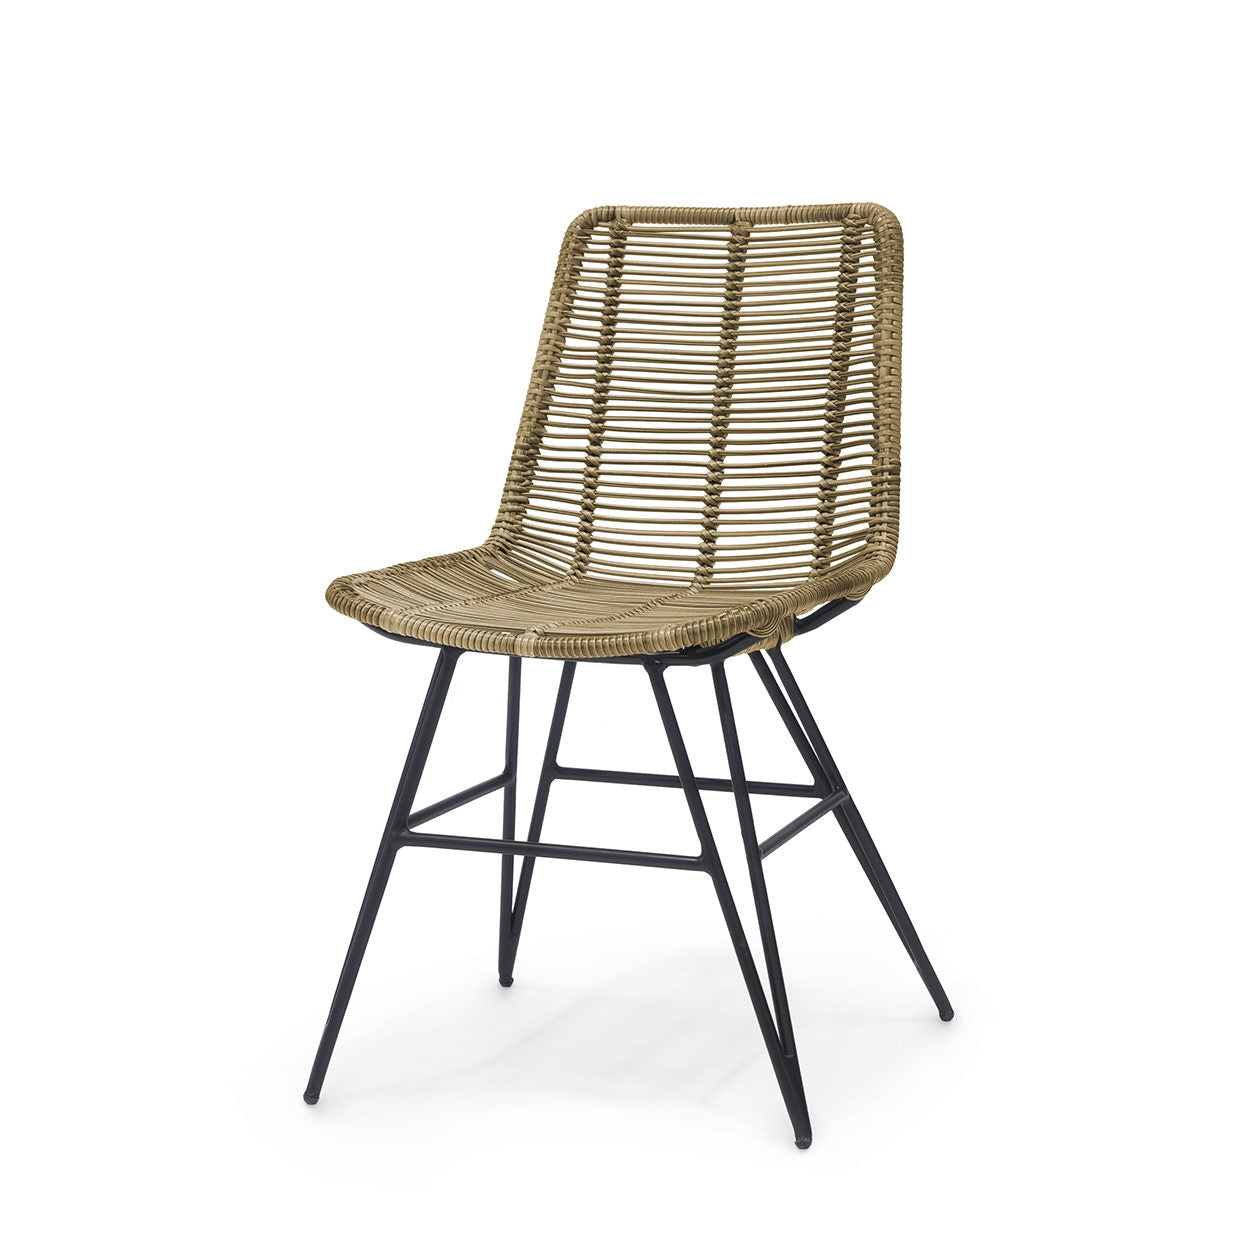 HERMOSA OUTDOOR SIDE CHAIR